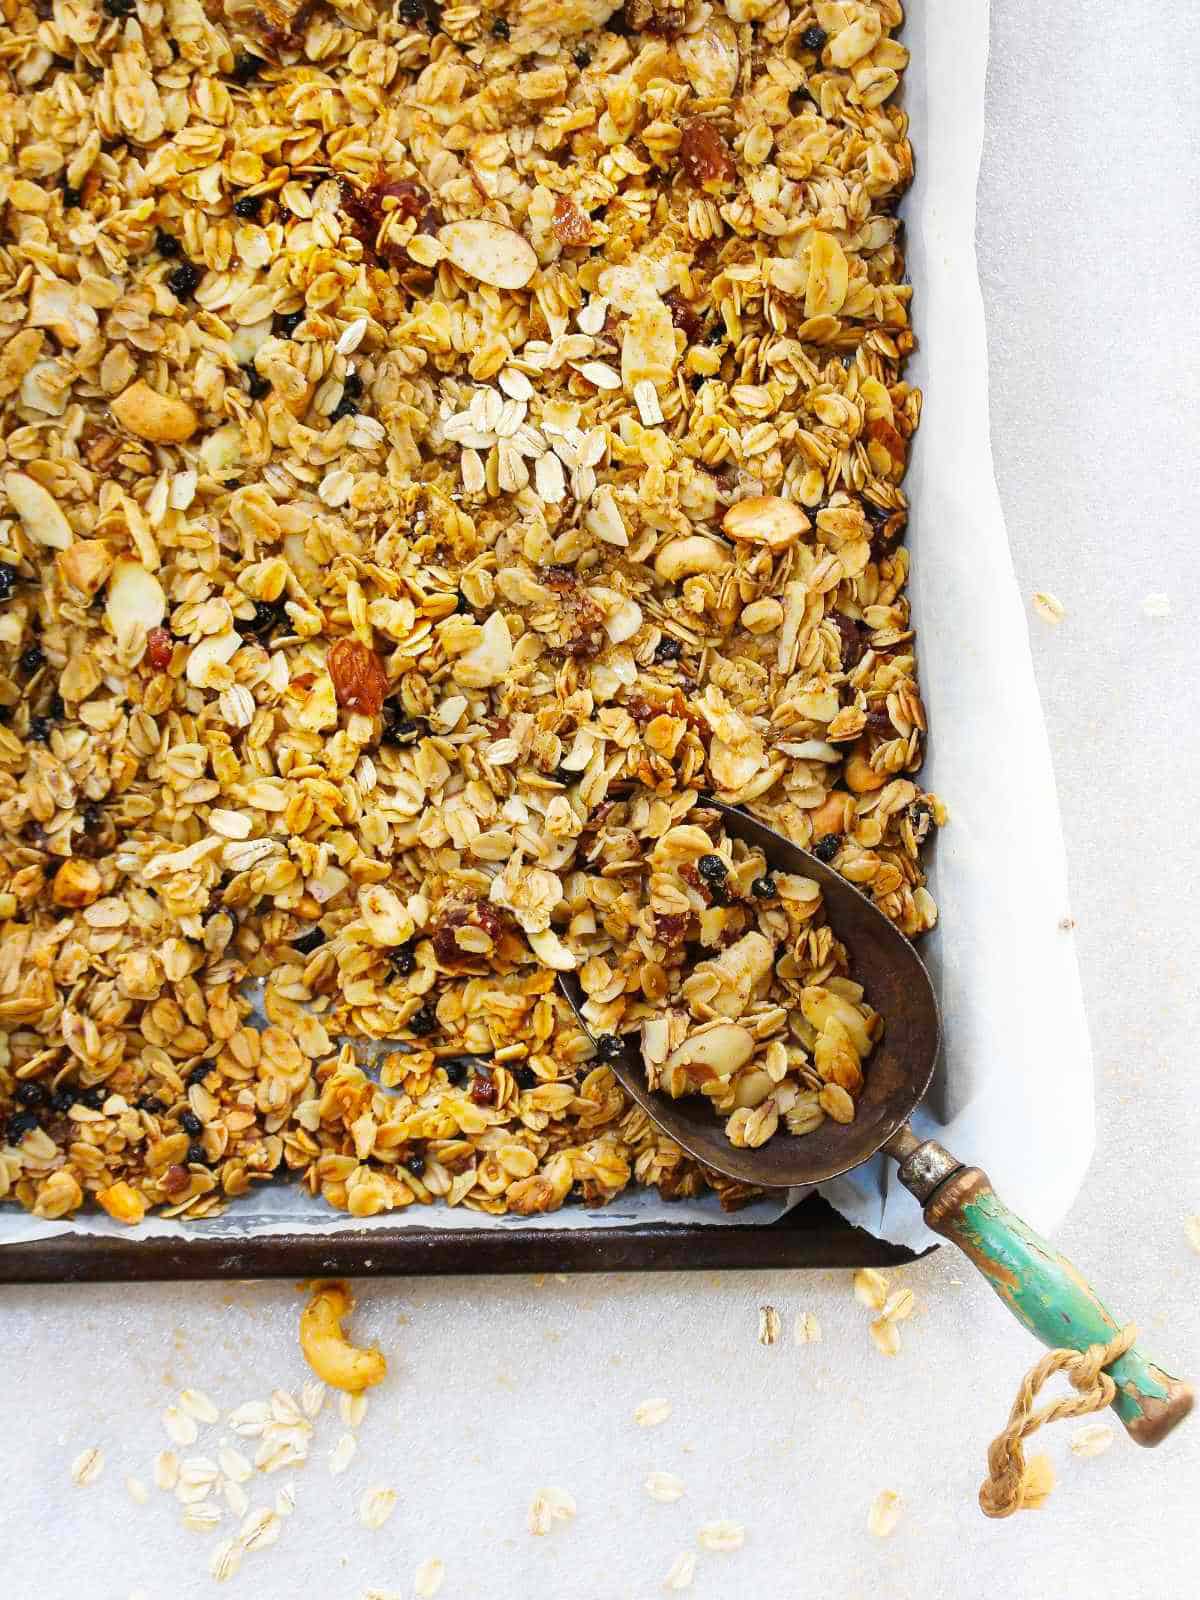 baked almond vanilla granola on a sheet pan with a blue handled scoop.